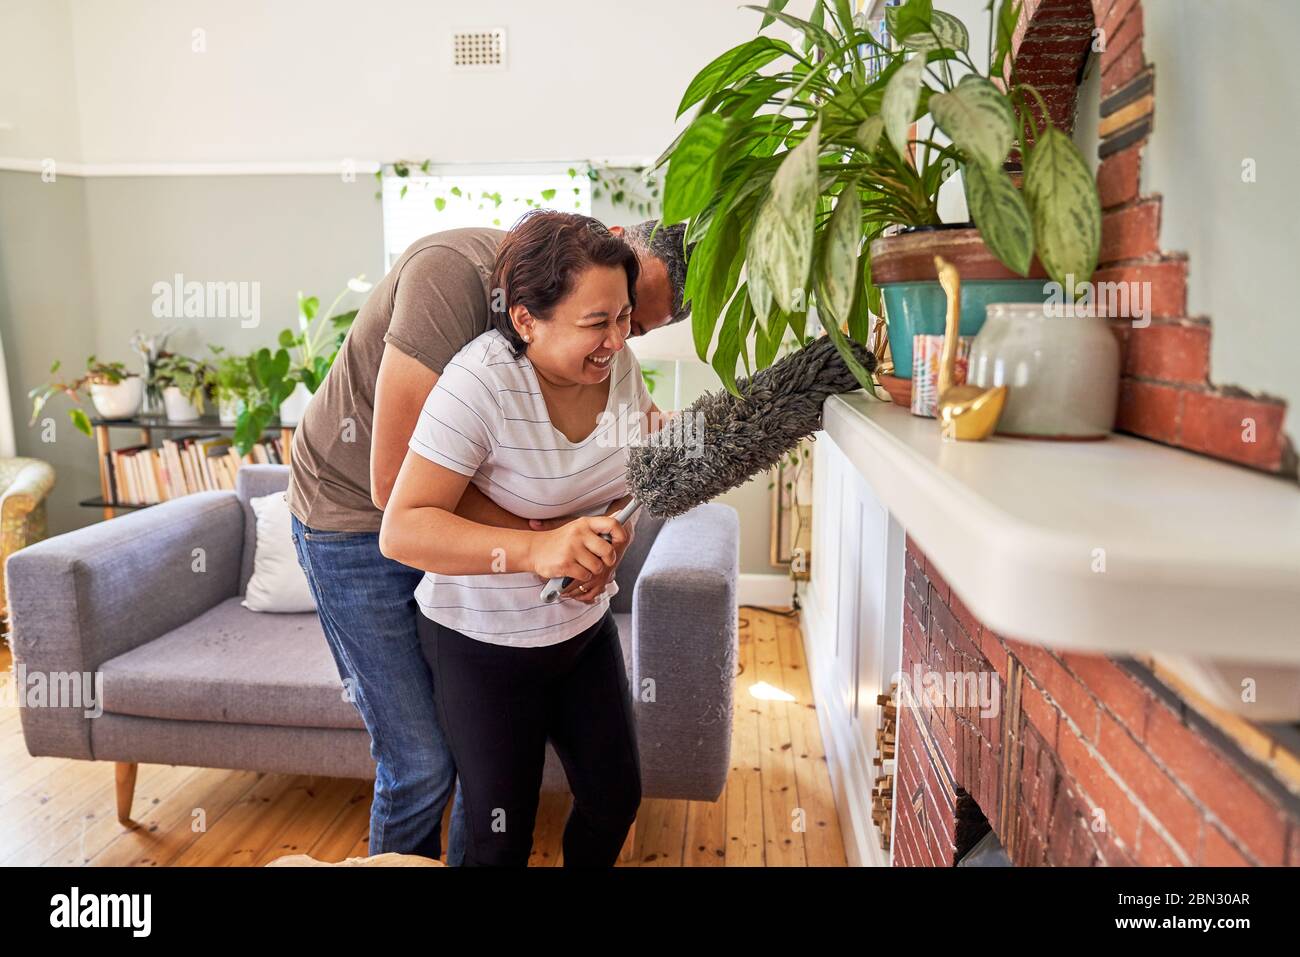 Affectionate playful mature couple with duster dusting living room Stock Photo